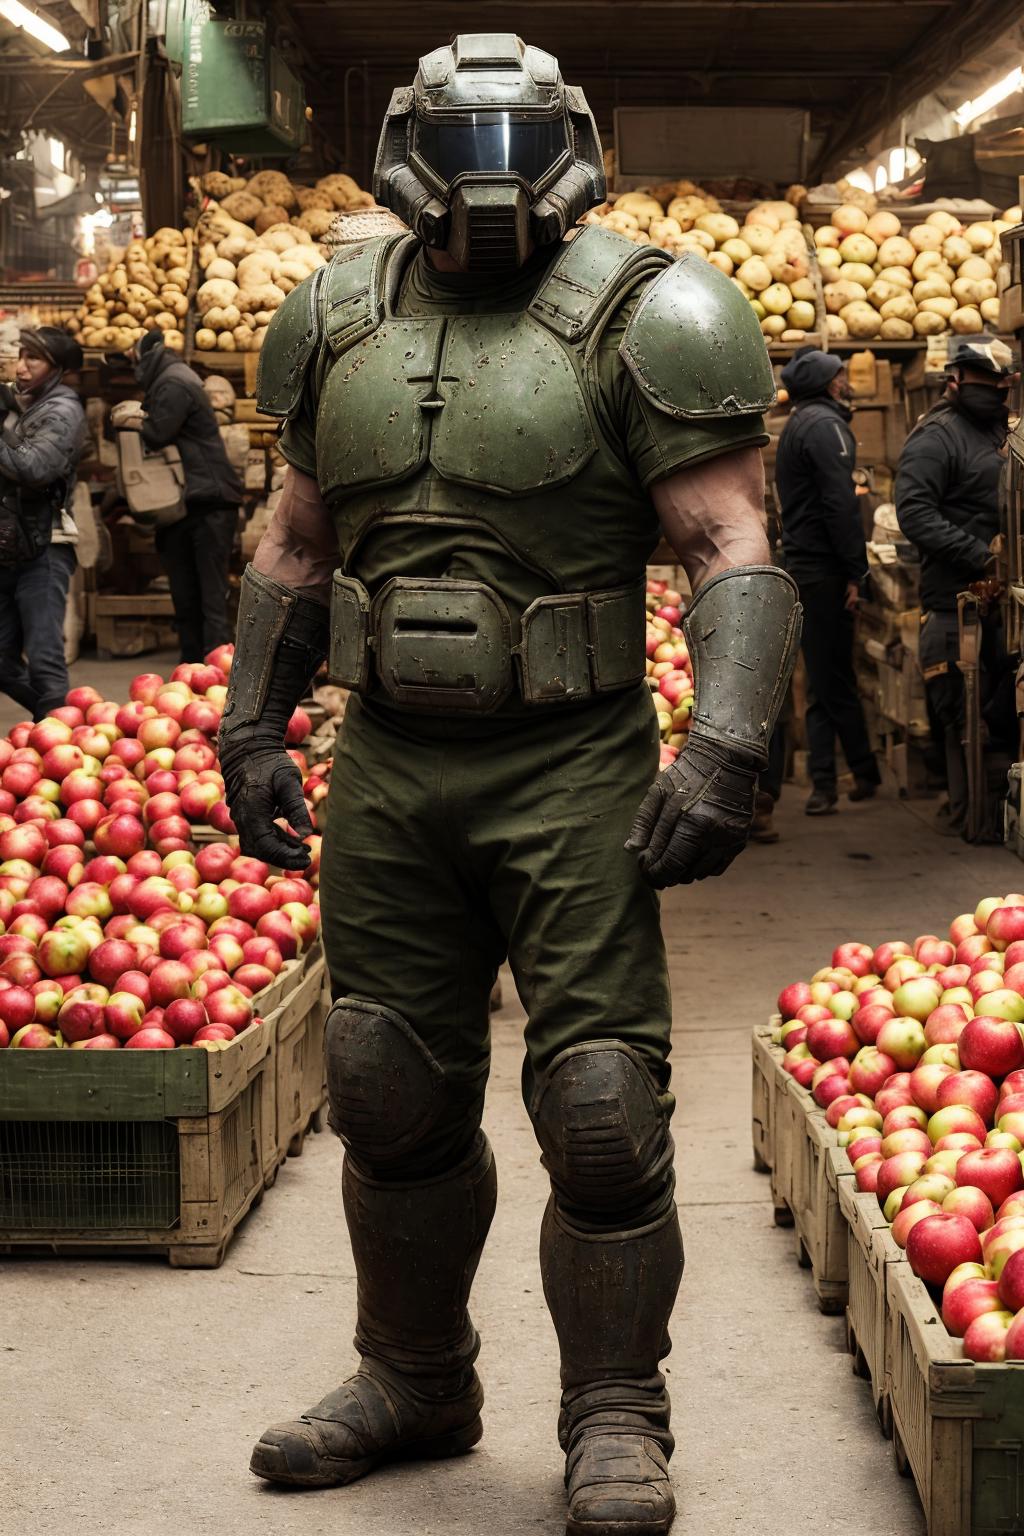 Green Power Suit Man Standing in Front of Apples at Market